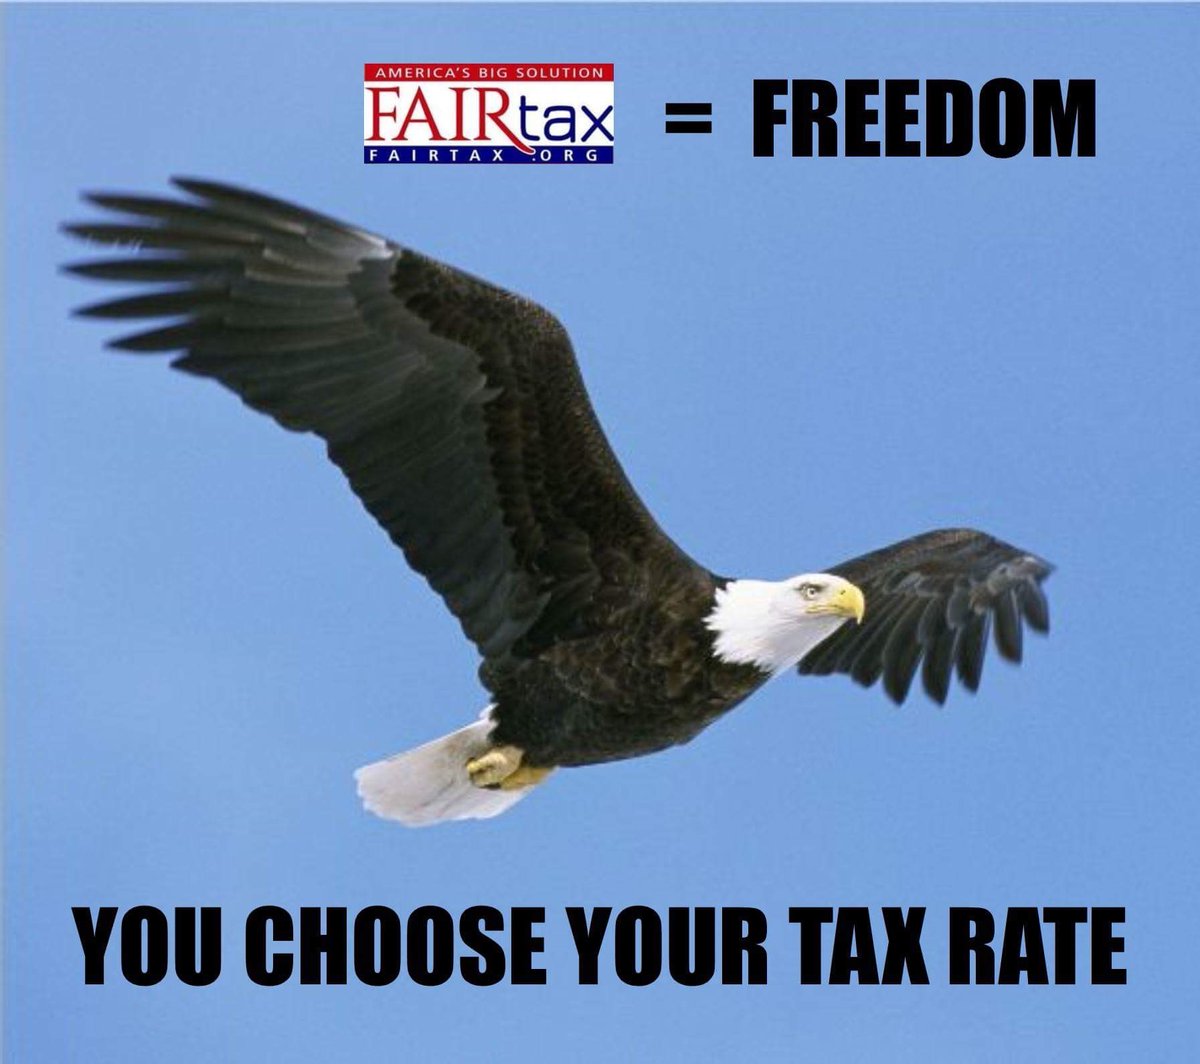 The #FAIRtax means #freedom to decide when, why & how much you are taxed by the federal government.